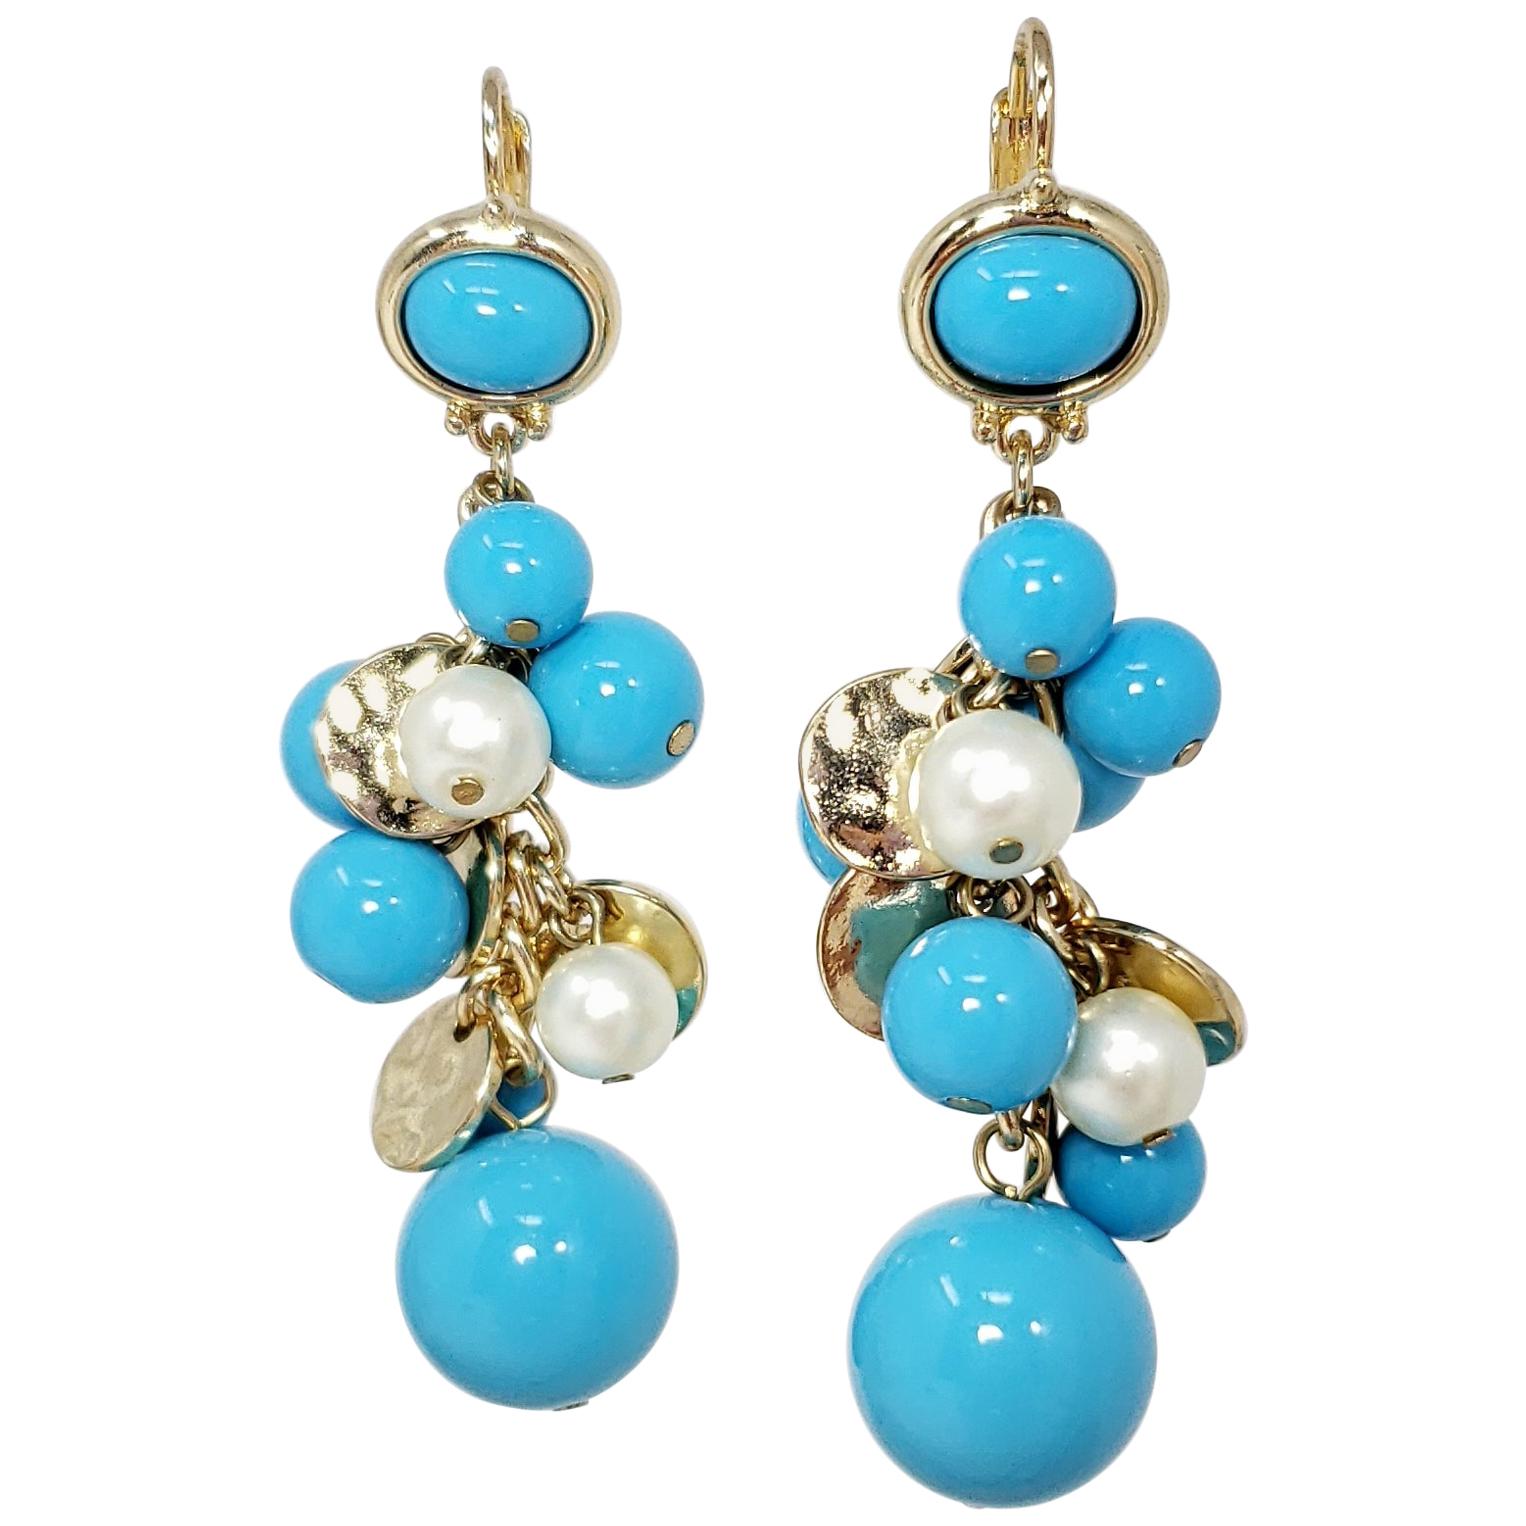 Kenneth Jay Lane KJL Dangling Cluster Turquoise and Faux Pearl Bead Earrings For Sale